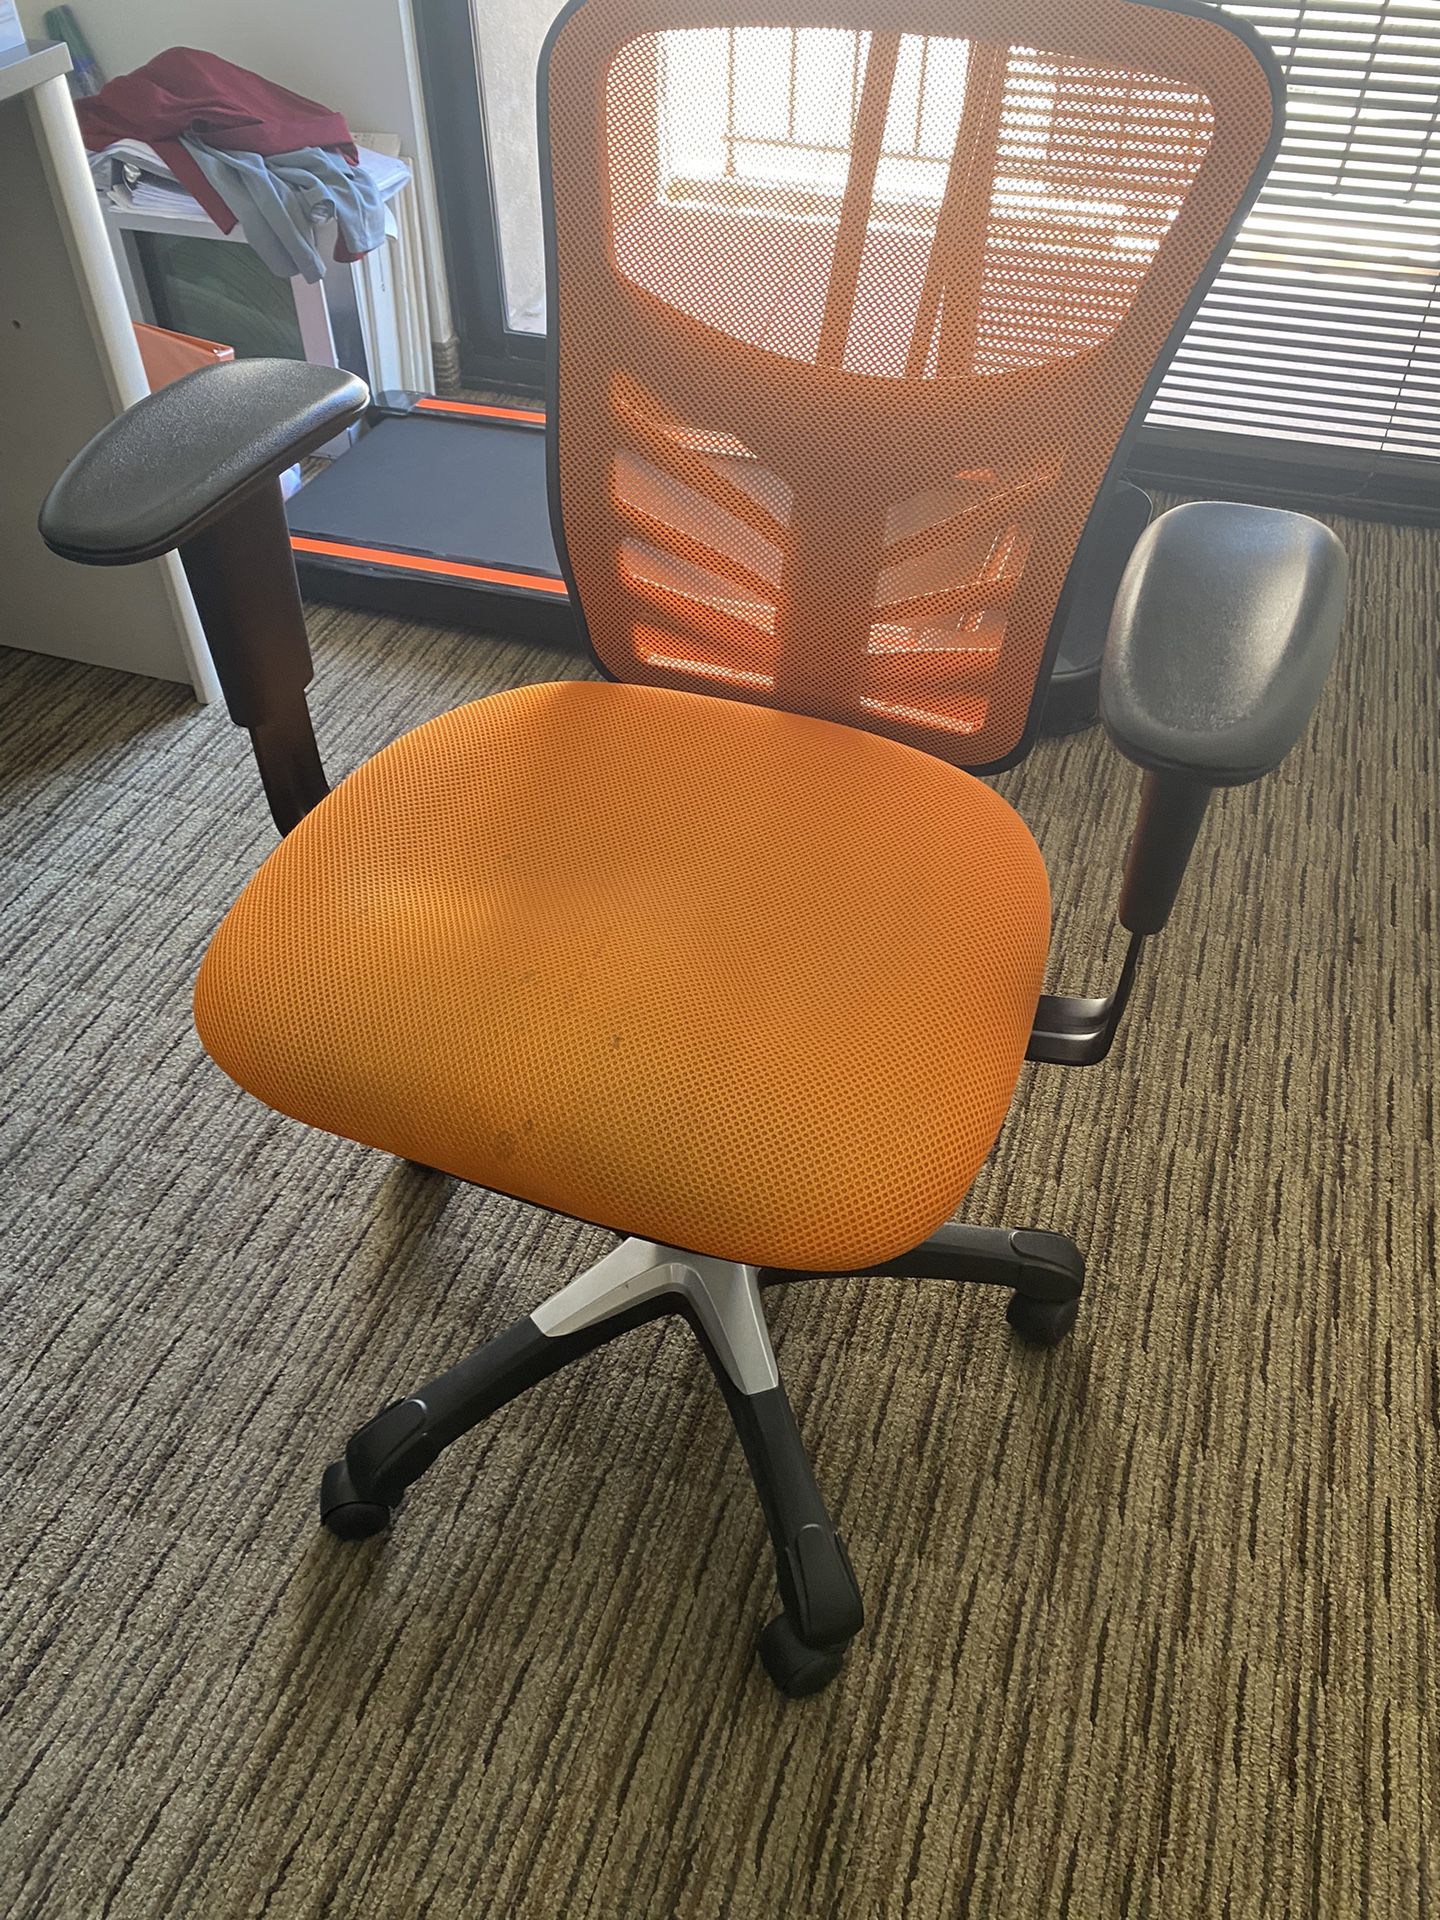 Ergonomic Office Chairs - 4 Total